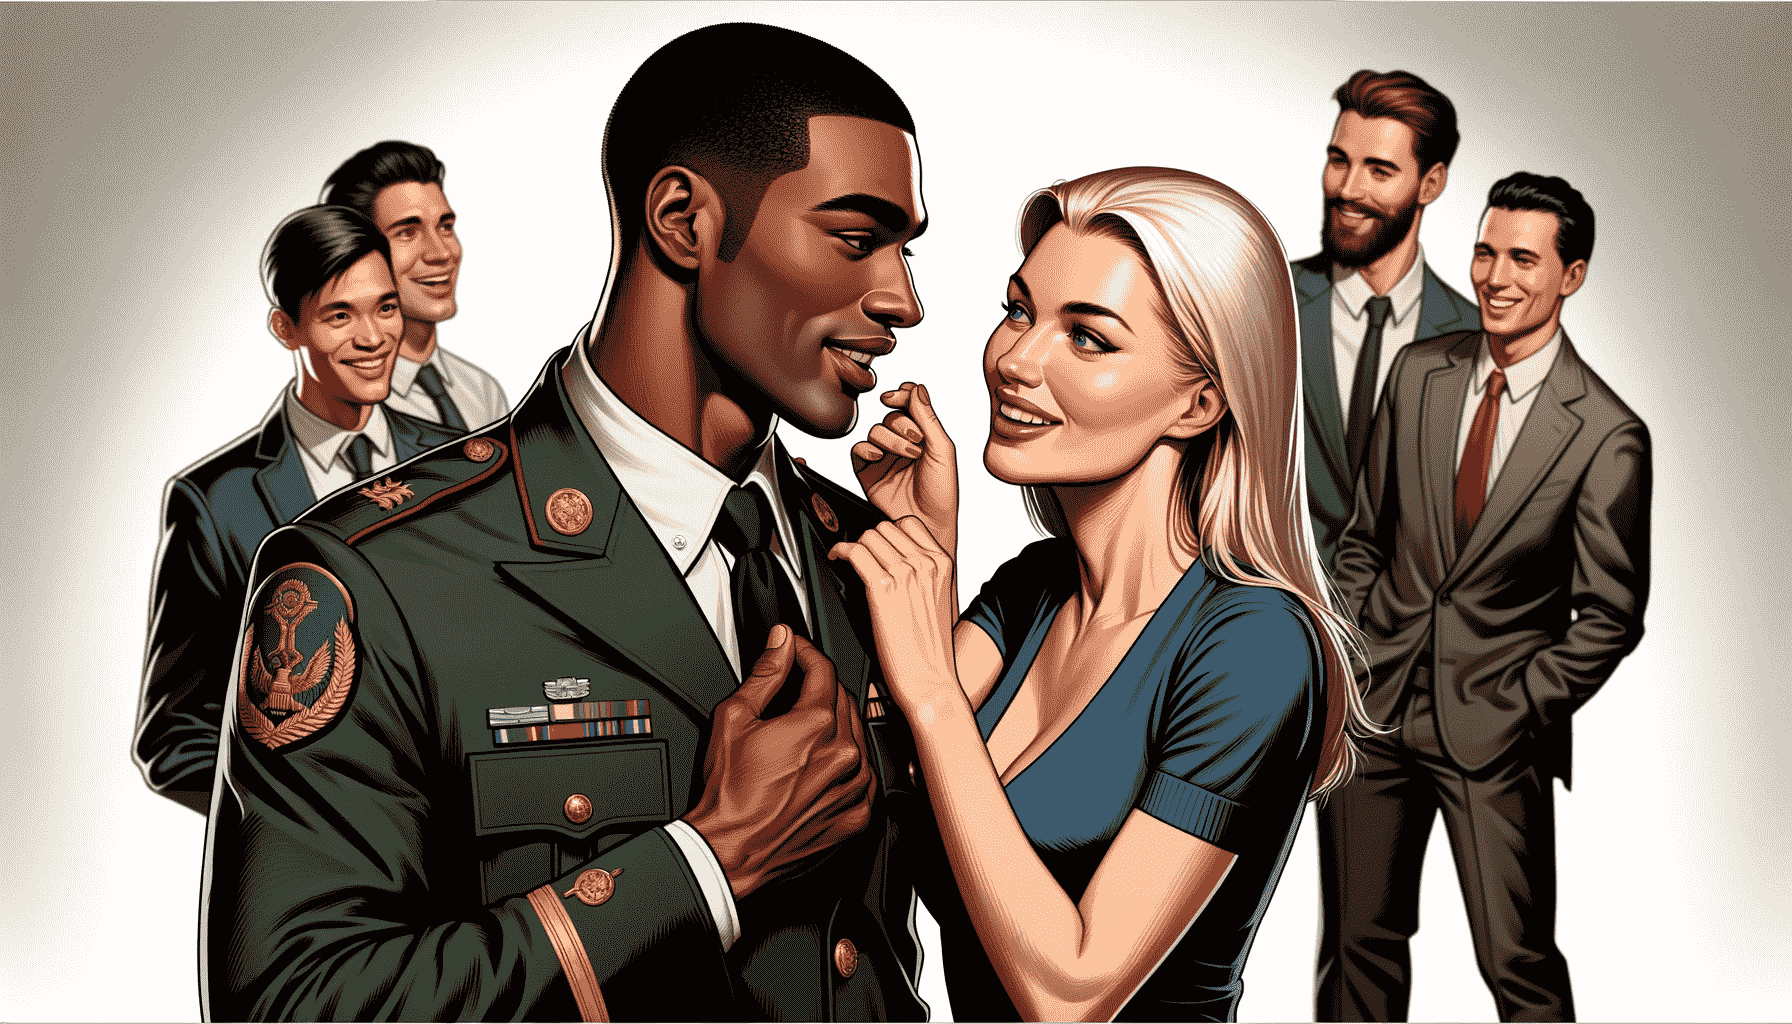 Military man with girlfriend and folks